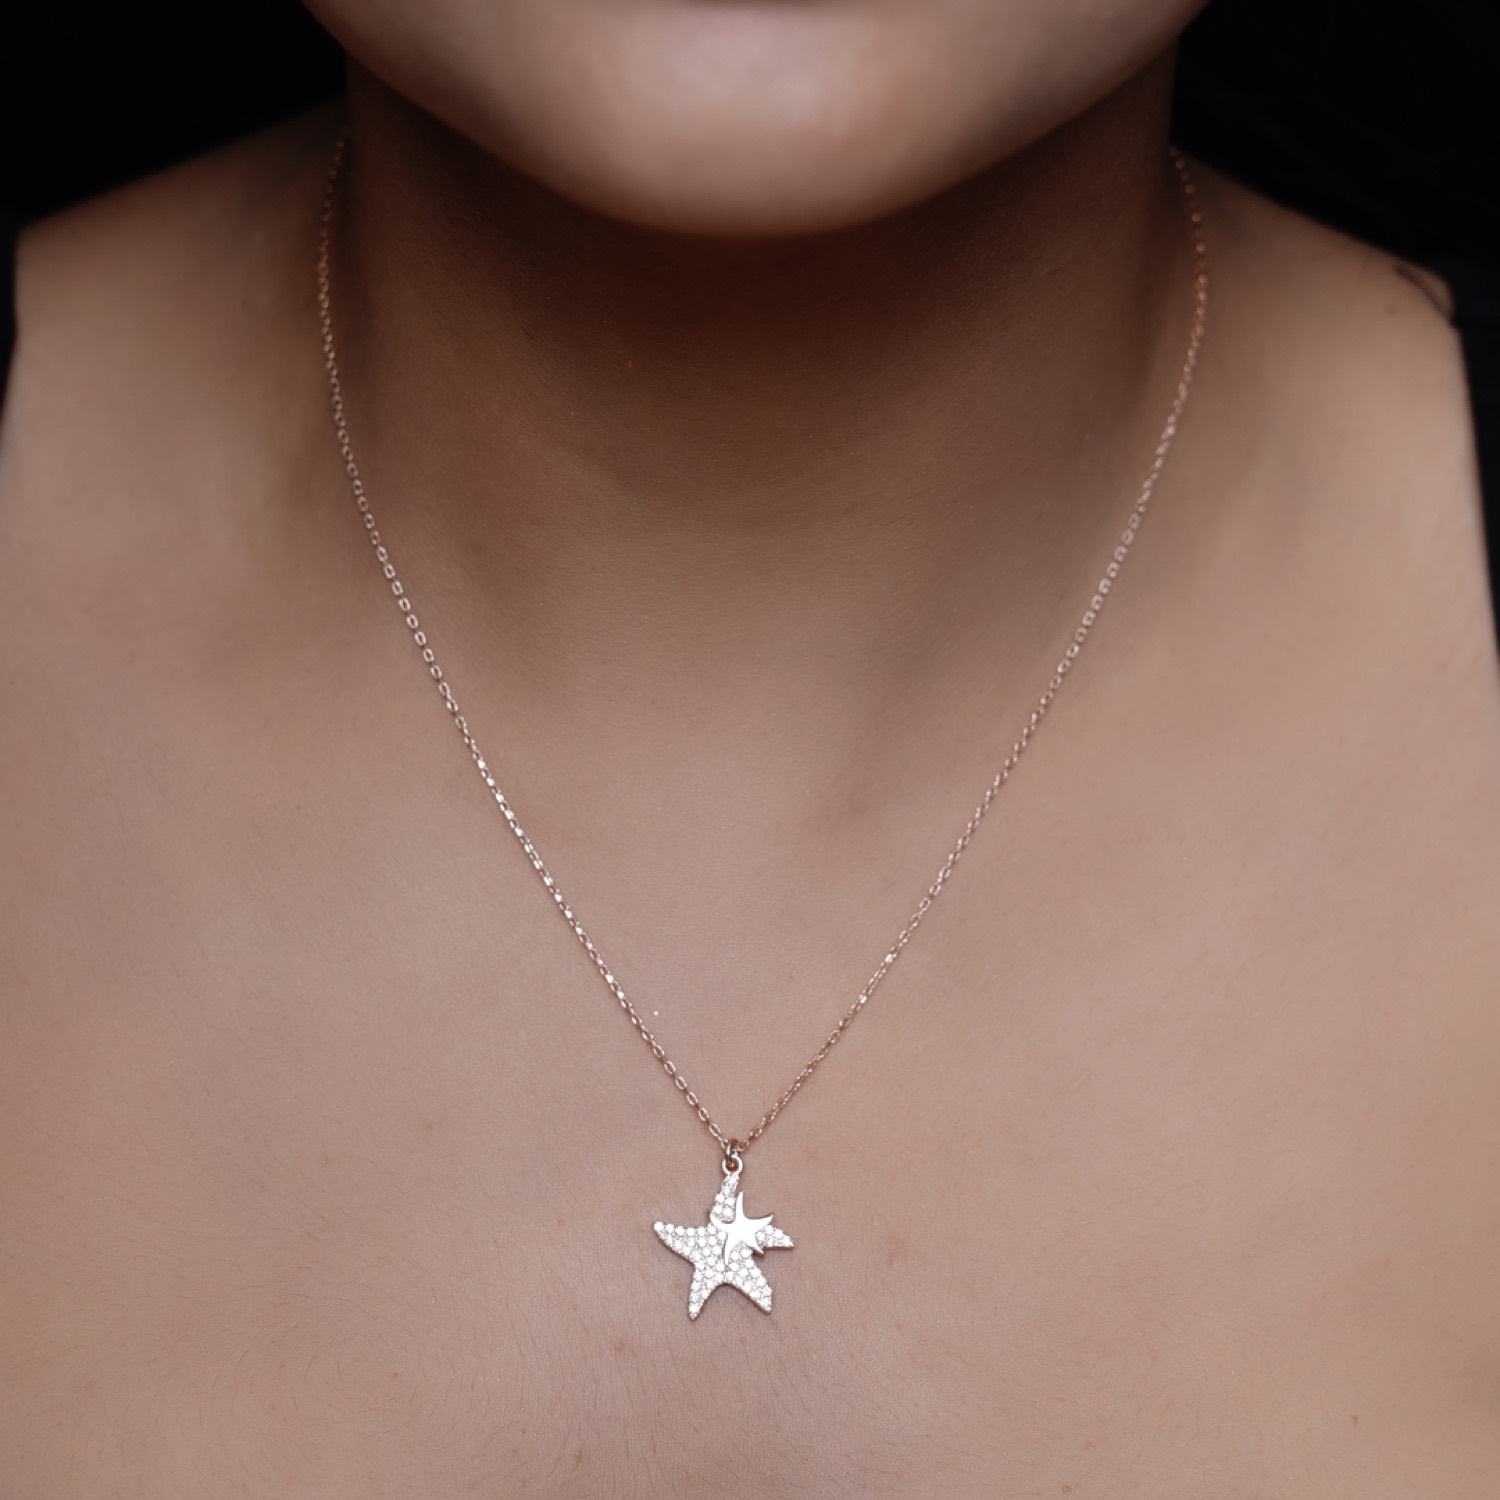 varam_chain_102022_starfish_pendant_with_rose_gold_silver_chain-2